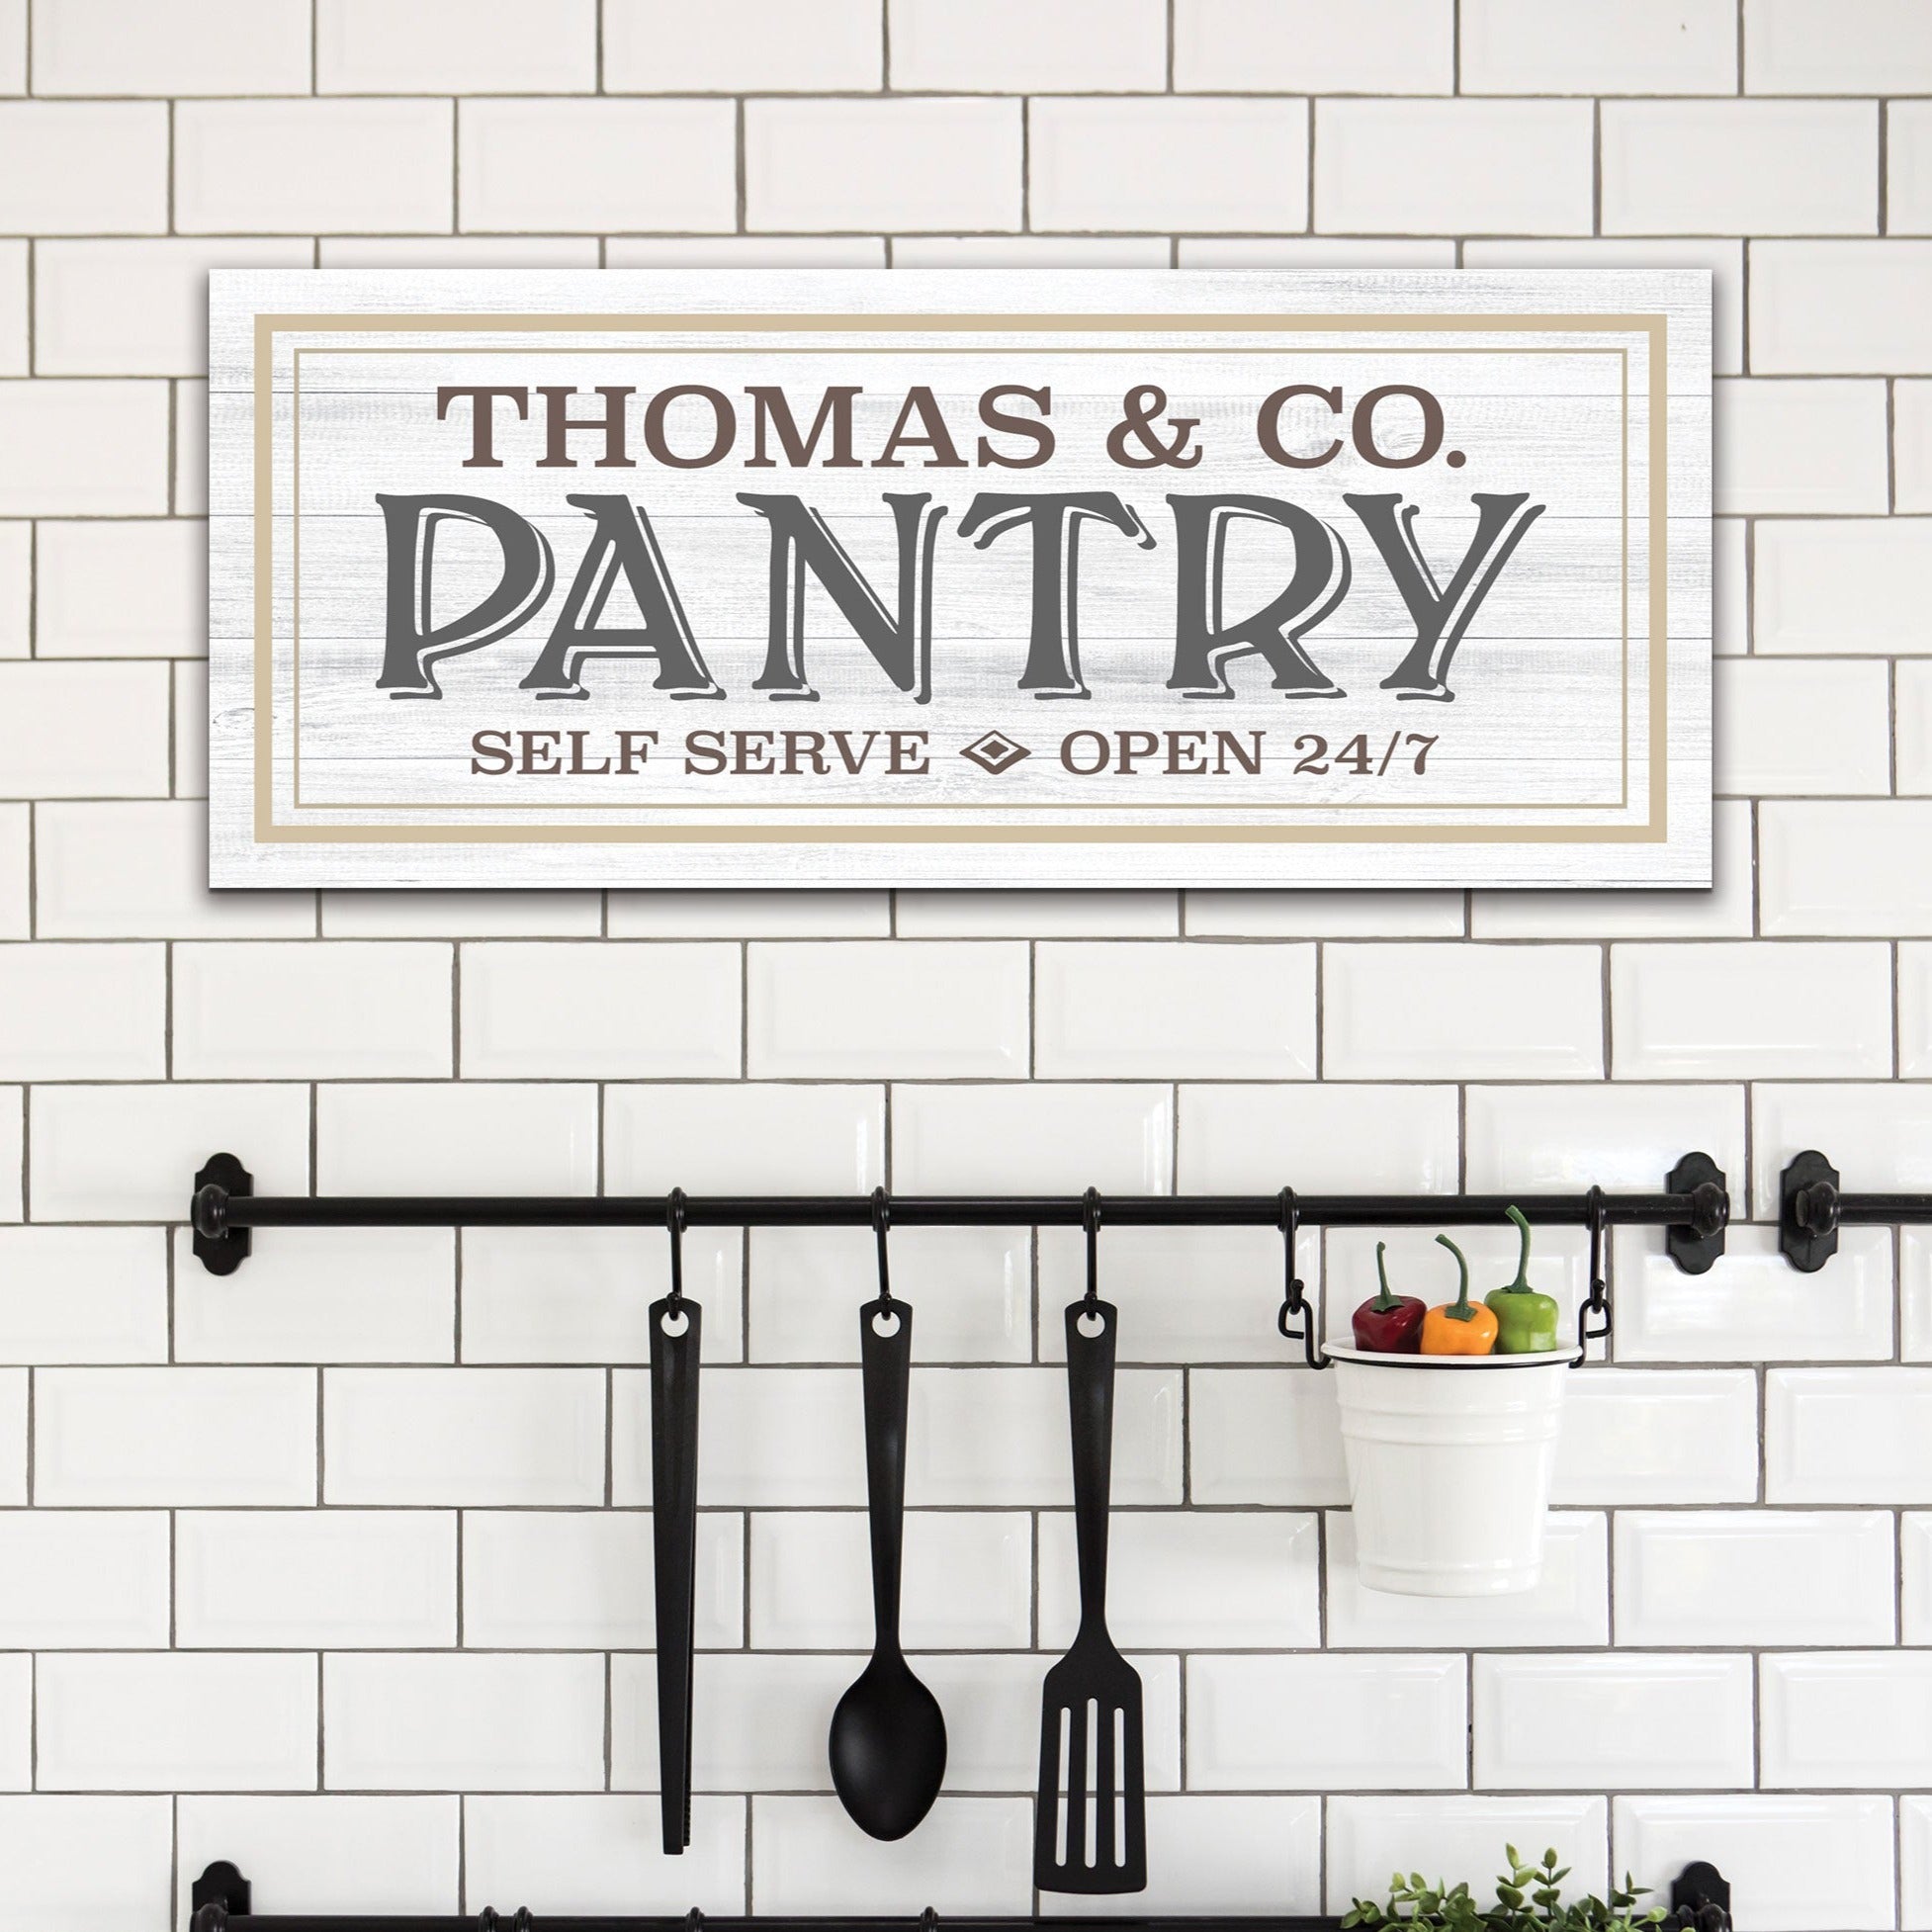 Kitchen Pantry Sign – TheWoodenFrame